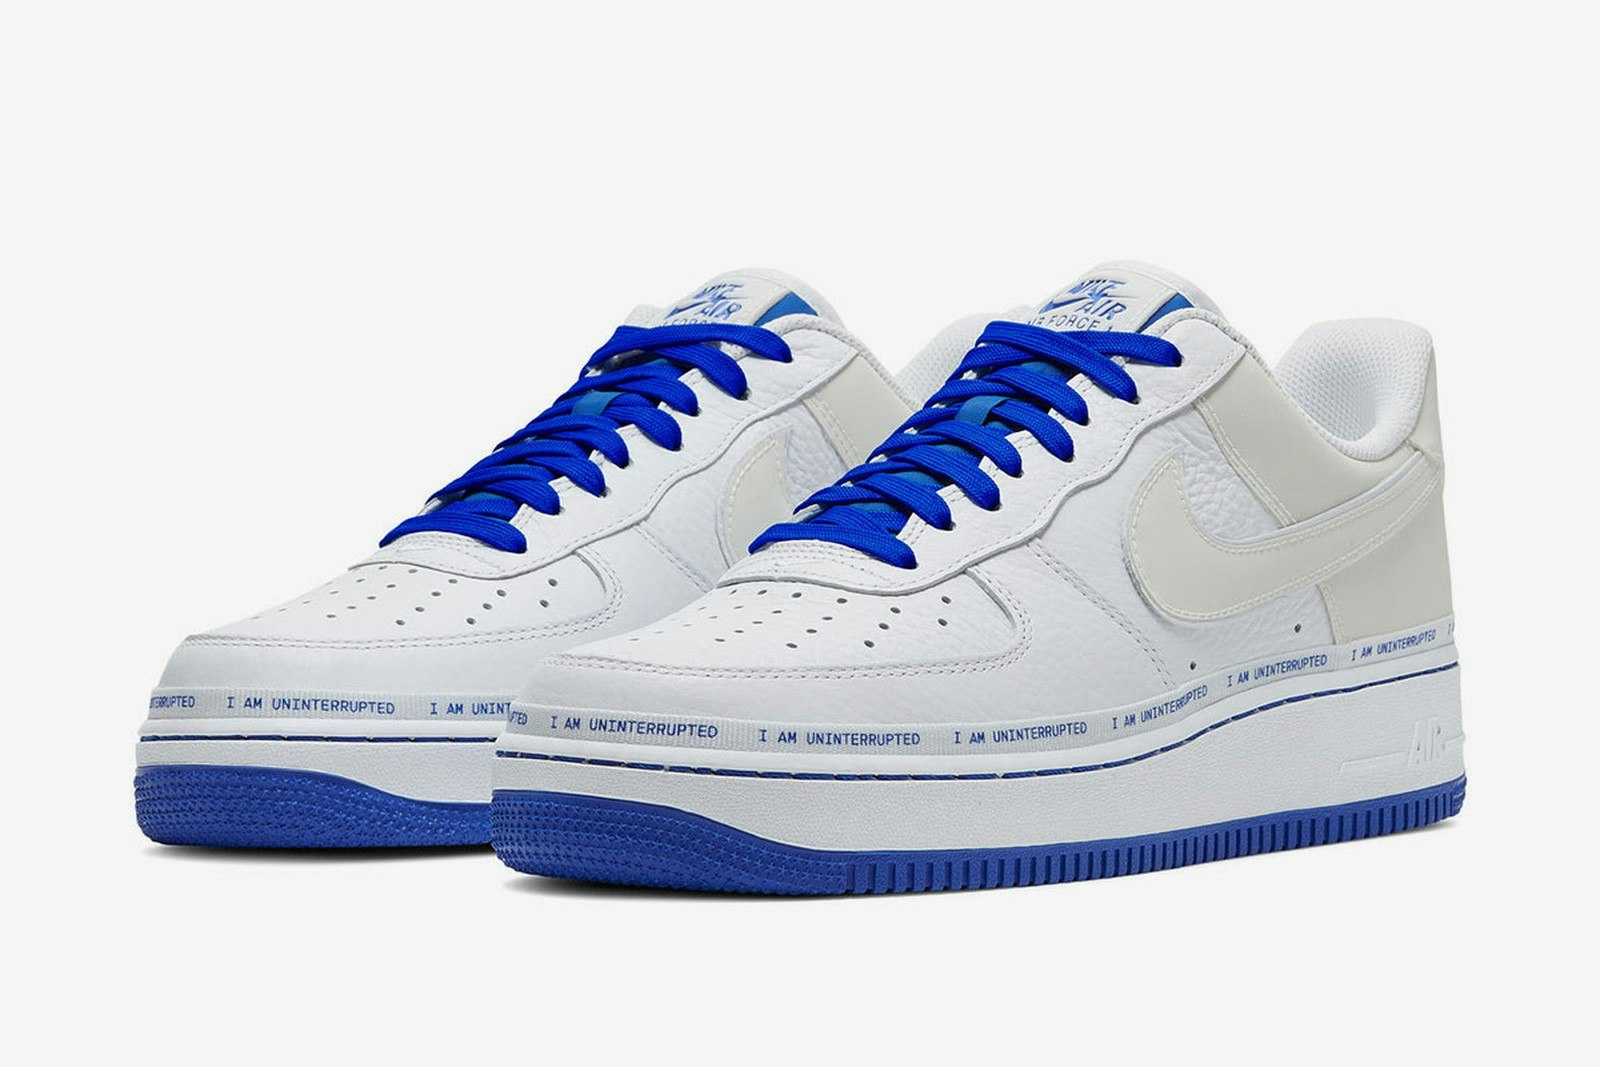 Uninterrupted x Nike Air Force 1 "More Than___"